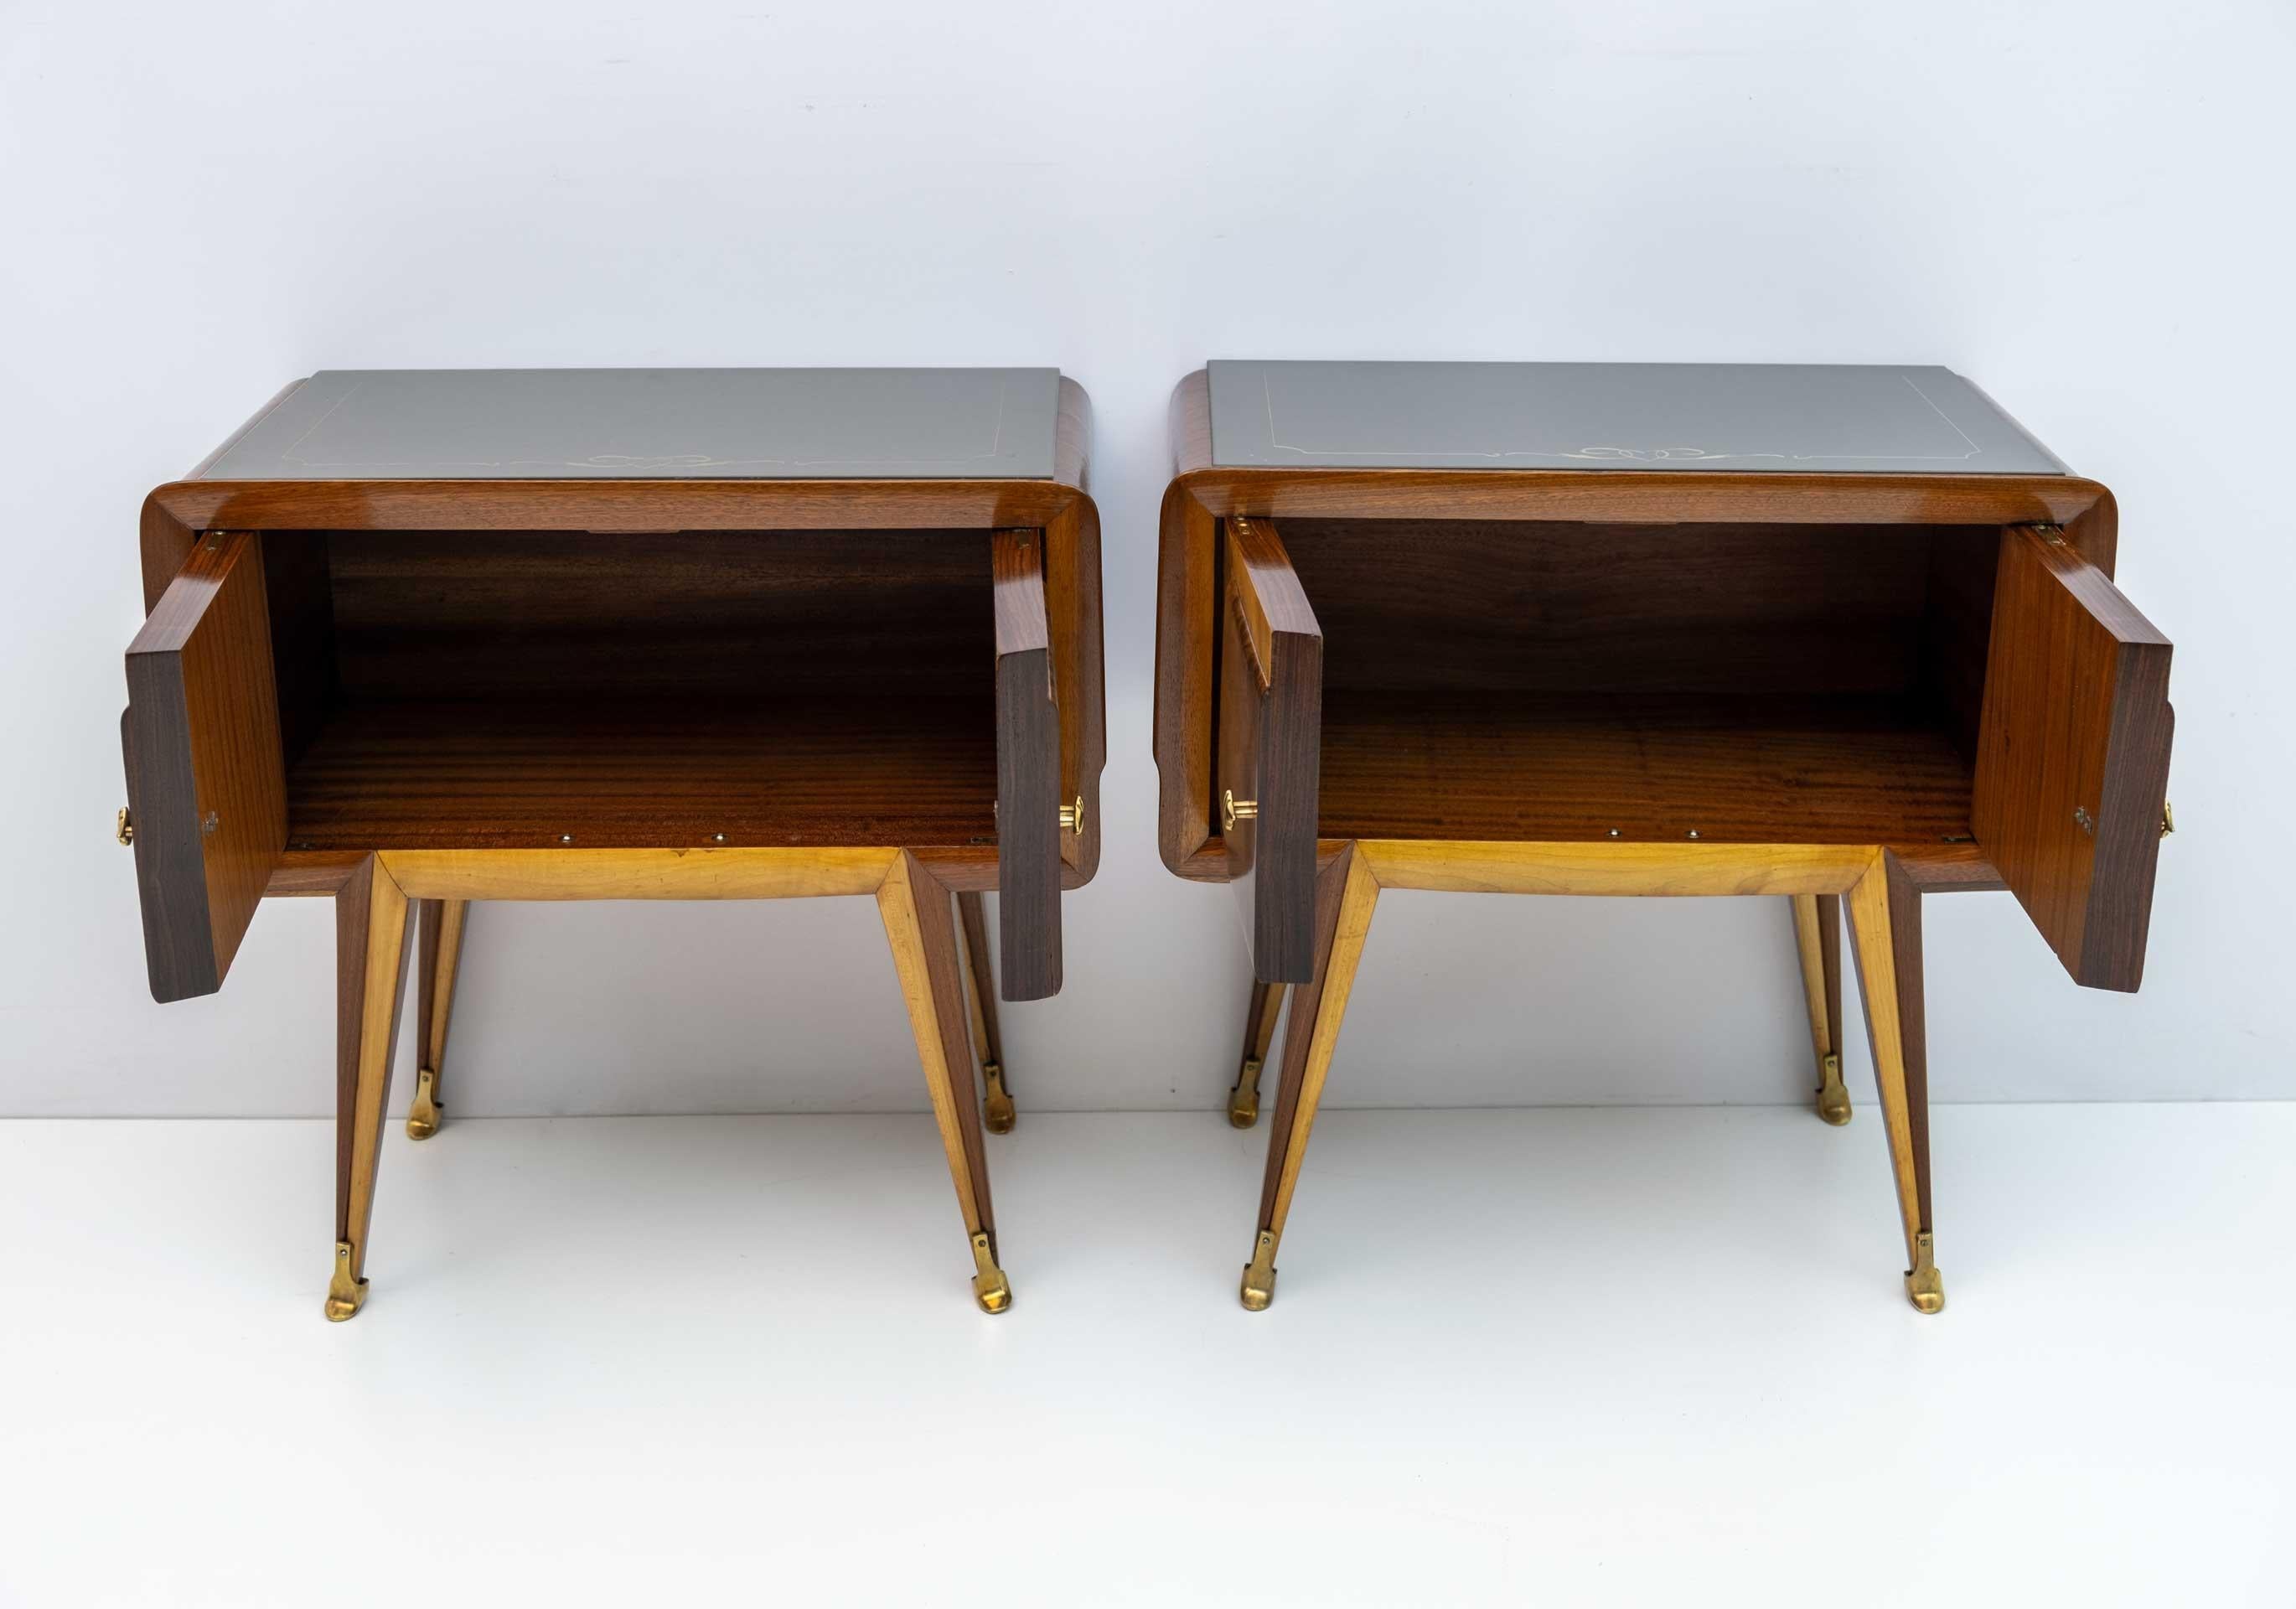 Brass Pair of Mid-Century Modern Italian Maple and Walnut Nightstands, 1950s For Sale